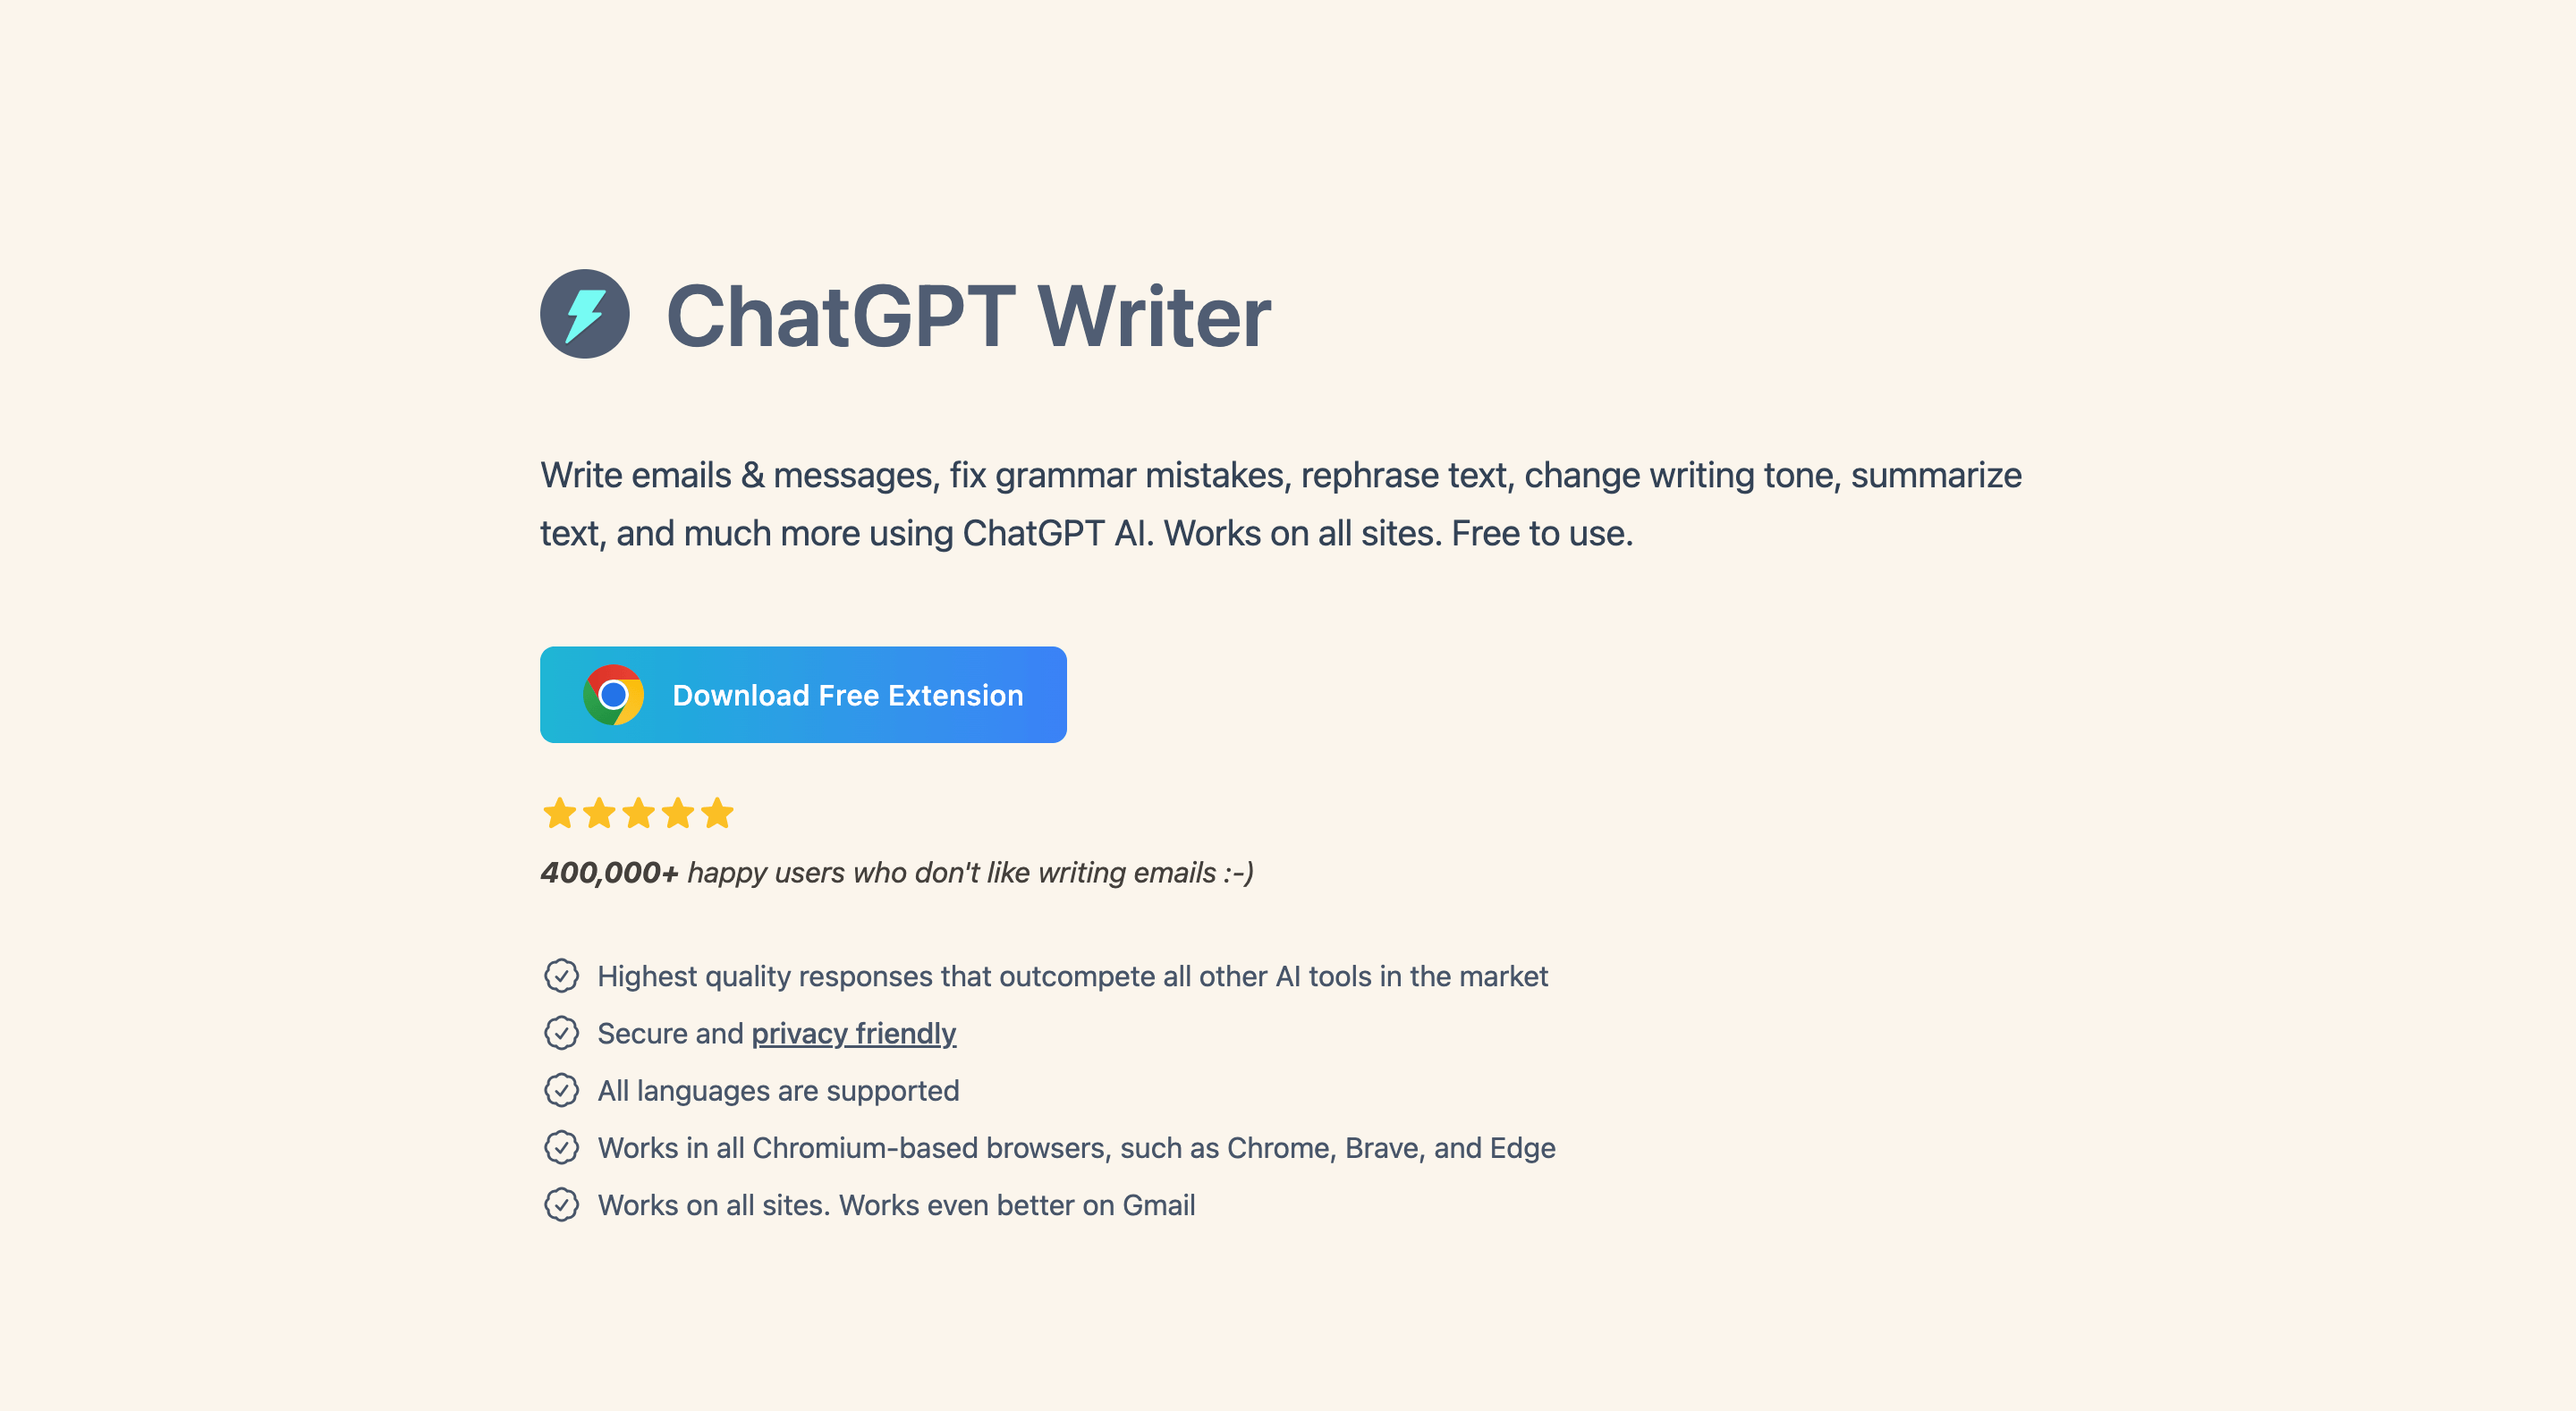 ChatGPT Writer for emails